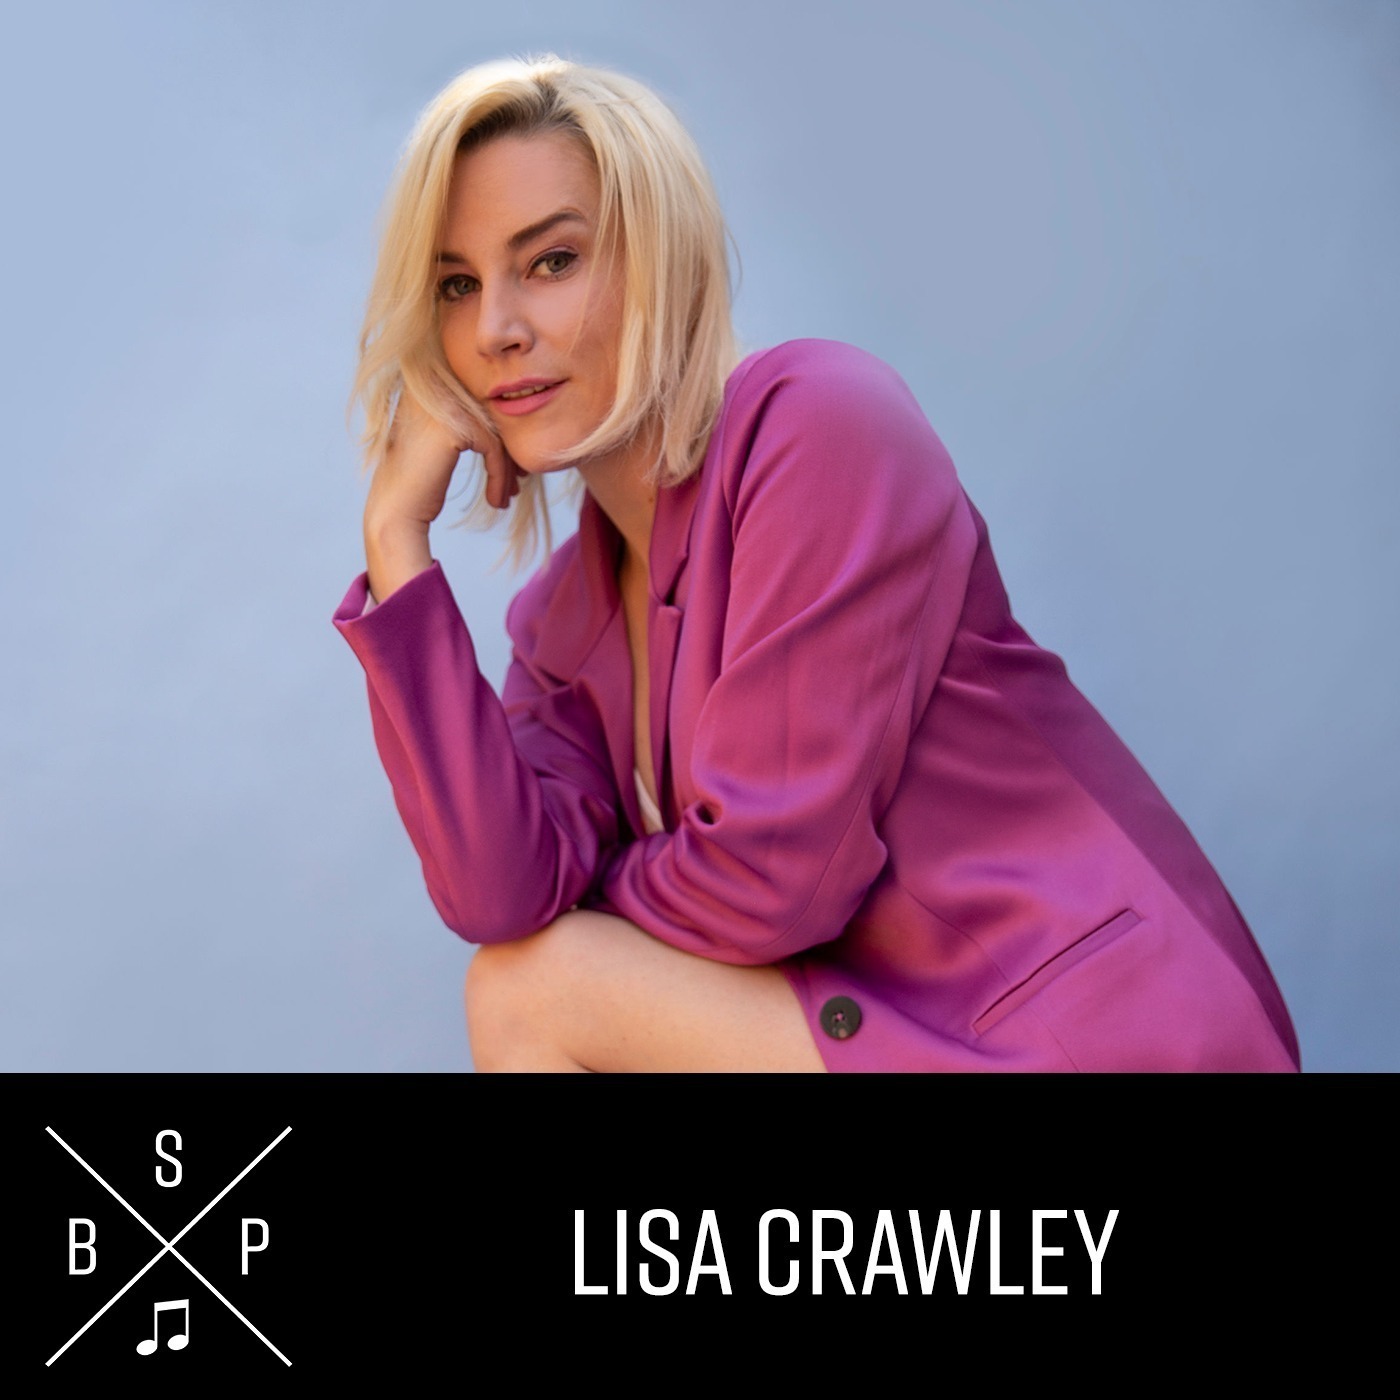 Best Thing In The Room by Lisa Crawley